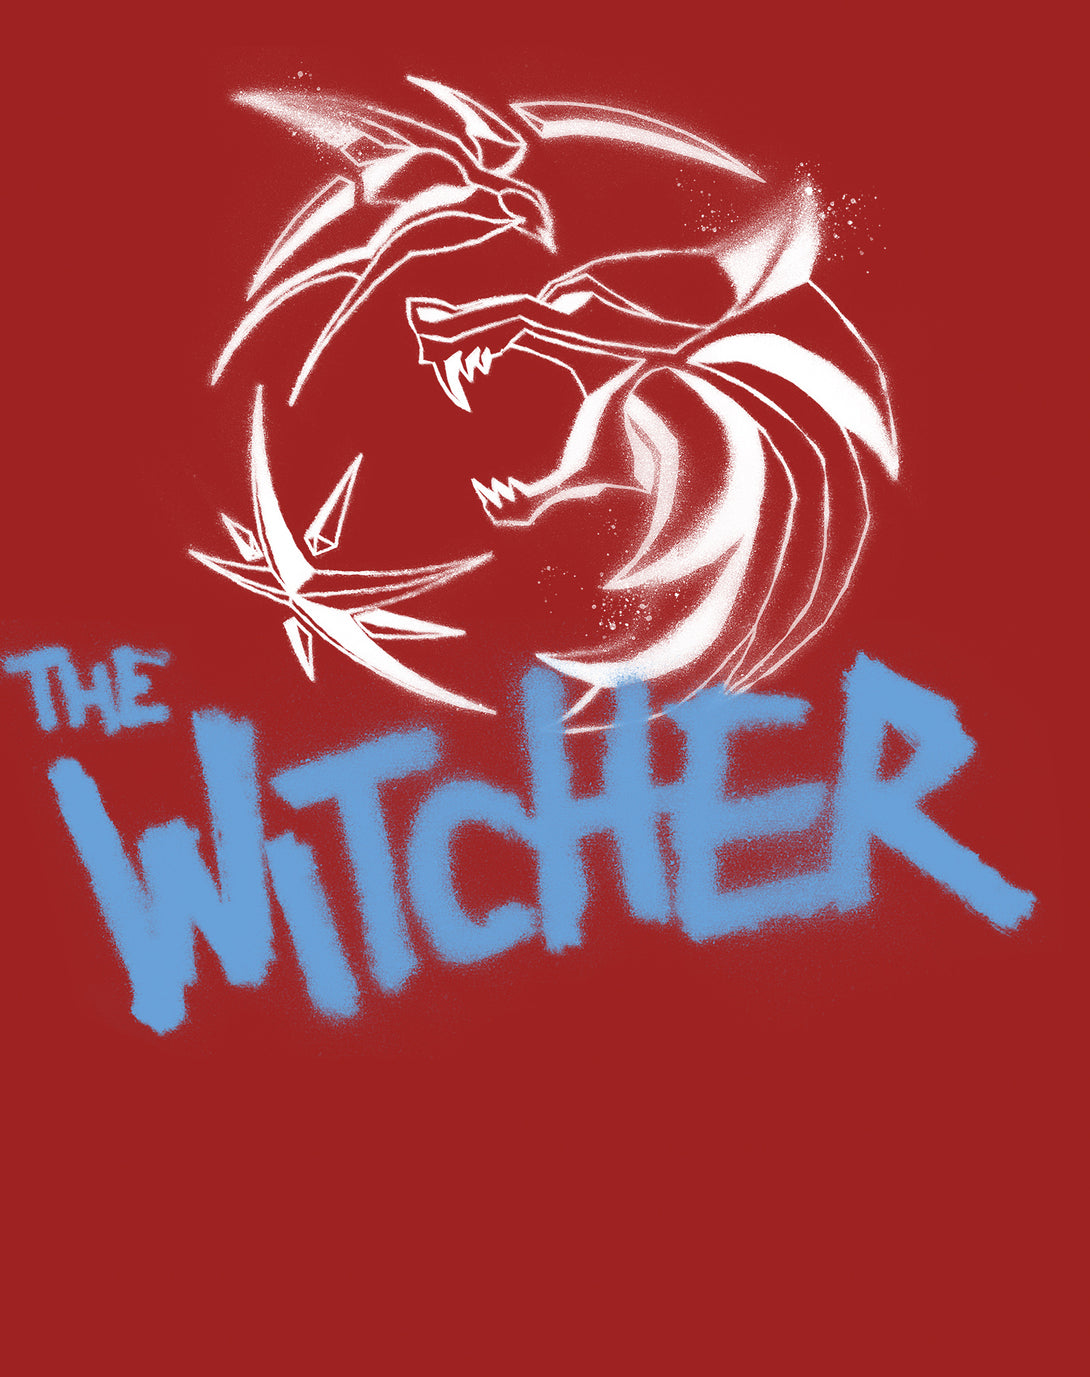 The Witcher Logo Stencil Slayer Official Women's T-Shirt Red - Urban Species Design Close Up